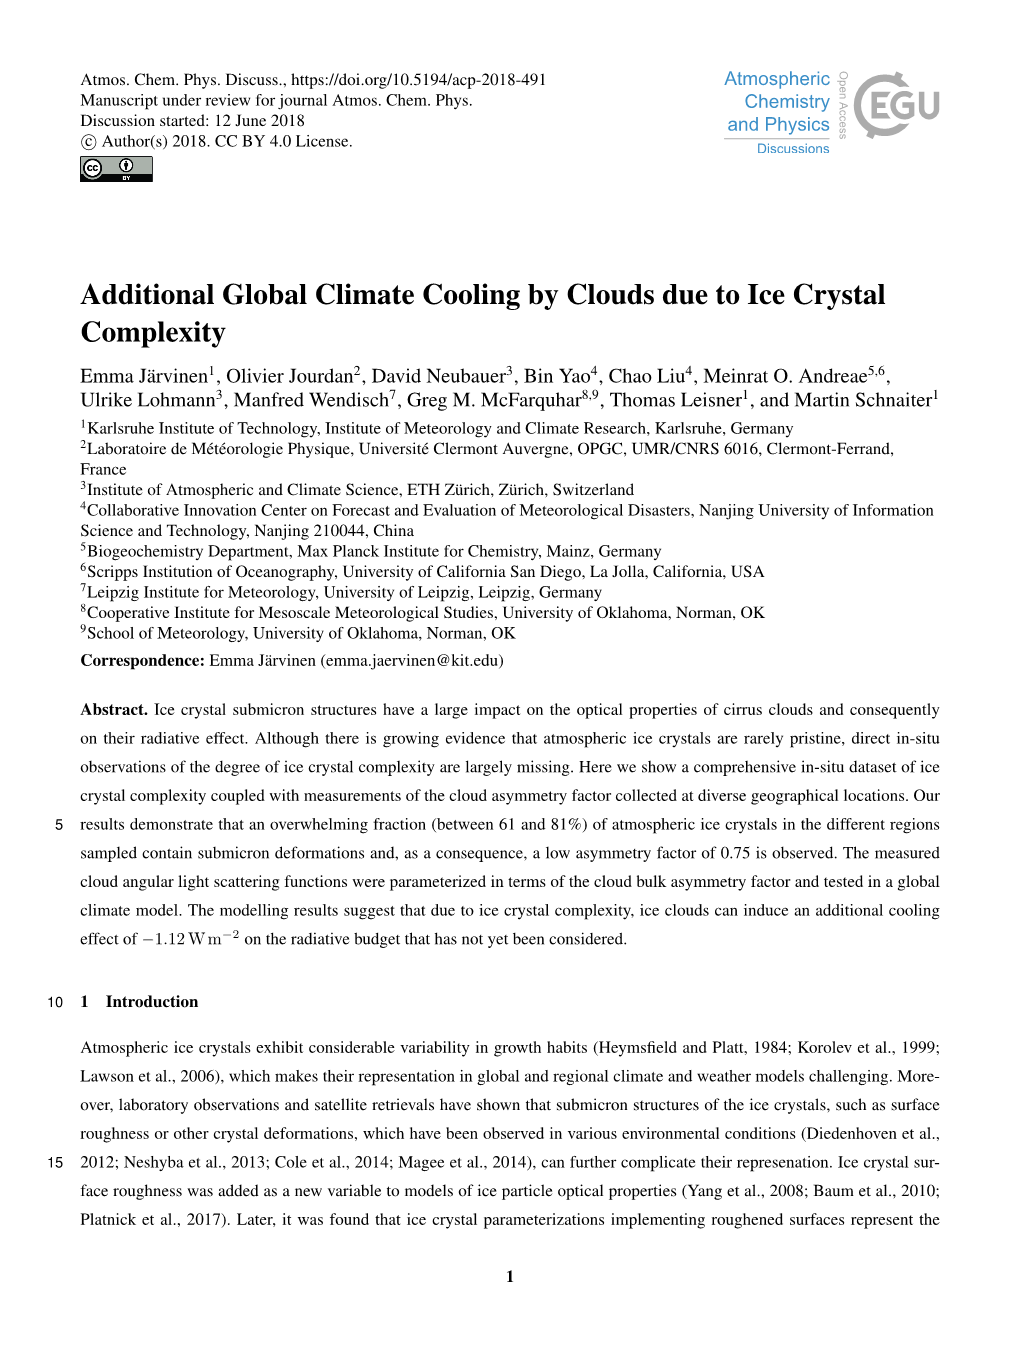 Additional Global Climate Cooling by Clouds Due to Ice Crystal Complexity Emma Järvinen1, Olivier Jourdan2, David Neubauer3, Bin Yao4, Chao Liu4, Meinrat O